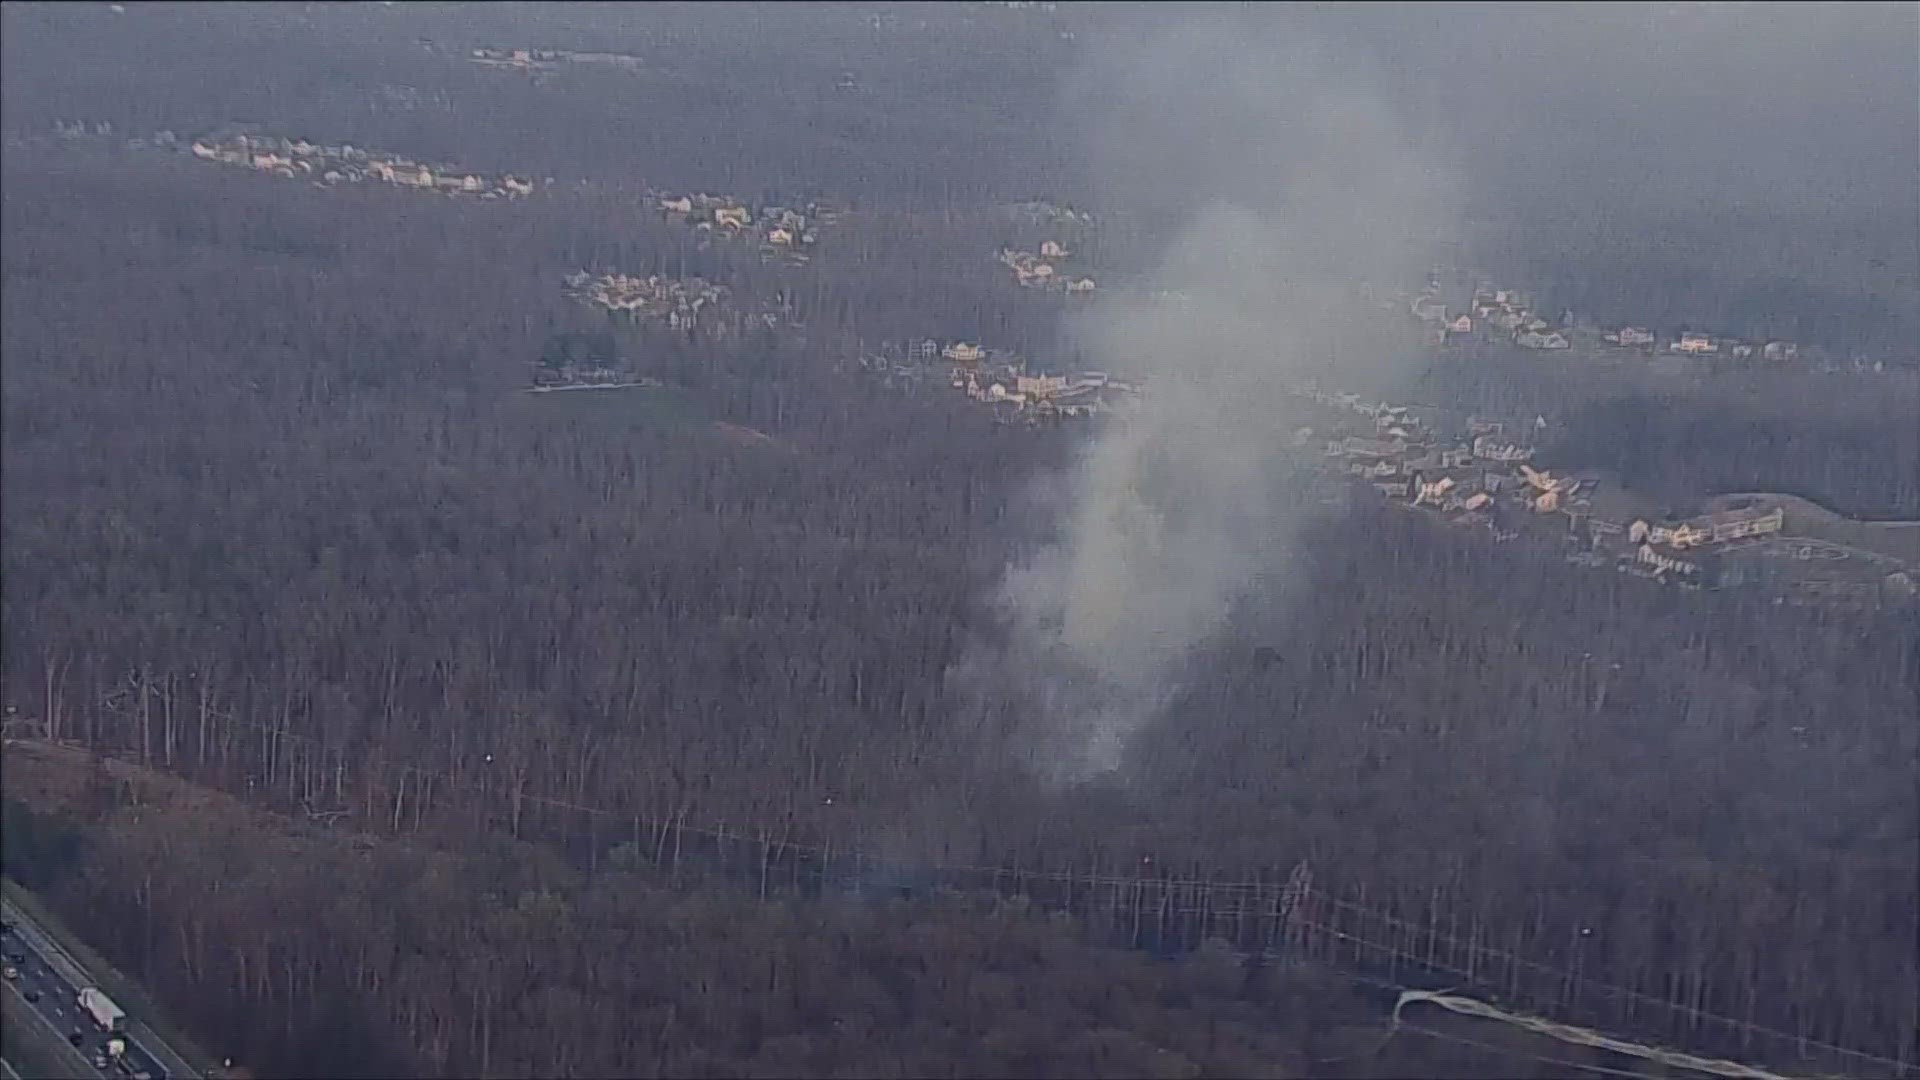 The brush fire may have been started by a downed power line and it appears to be quickly spreading.